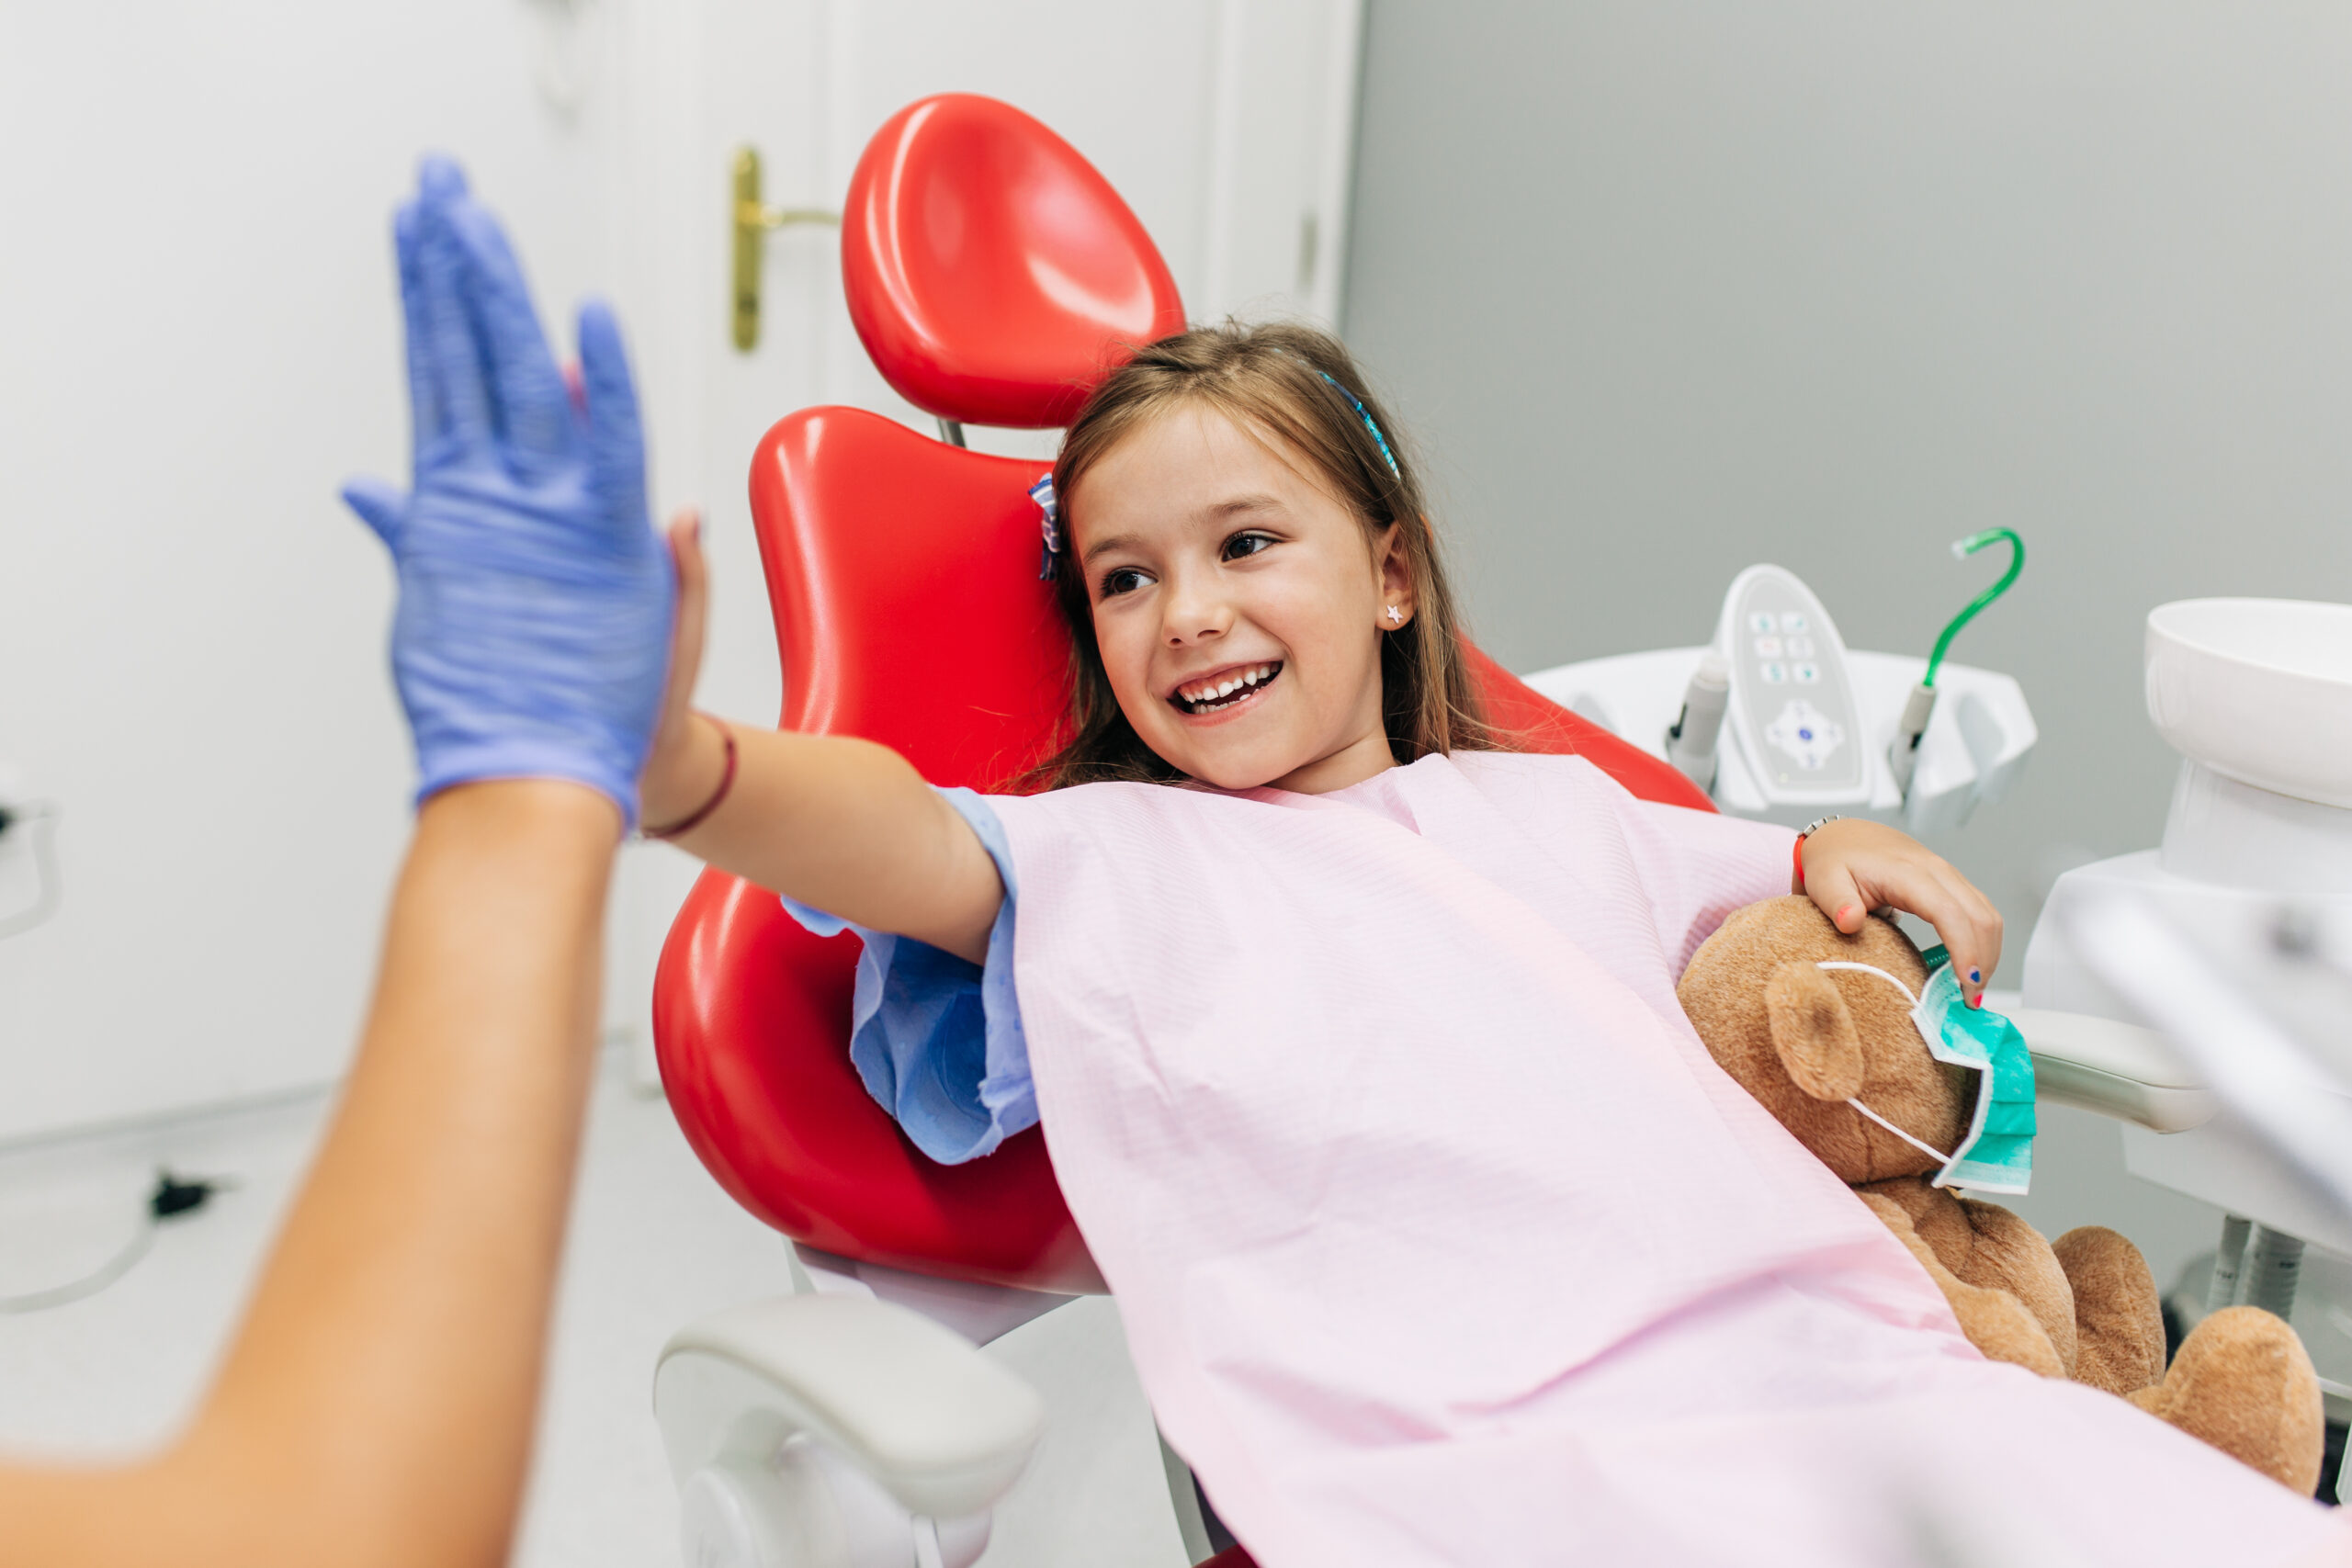 Pediatric Dentist vs. Family Dentist | What's the Difference?